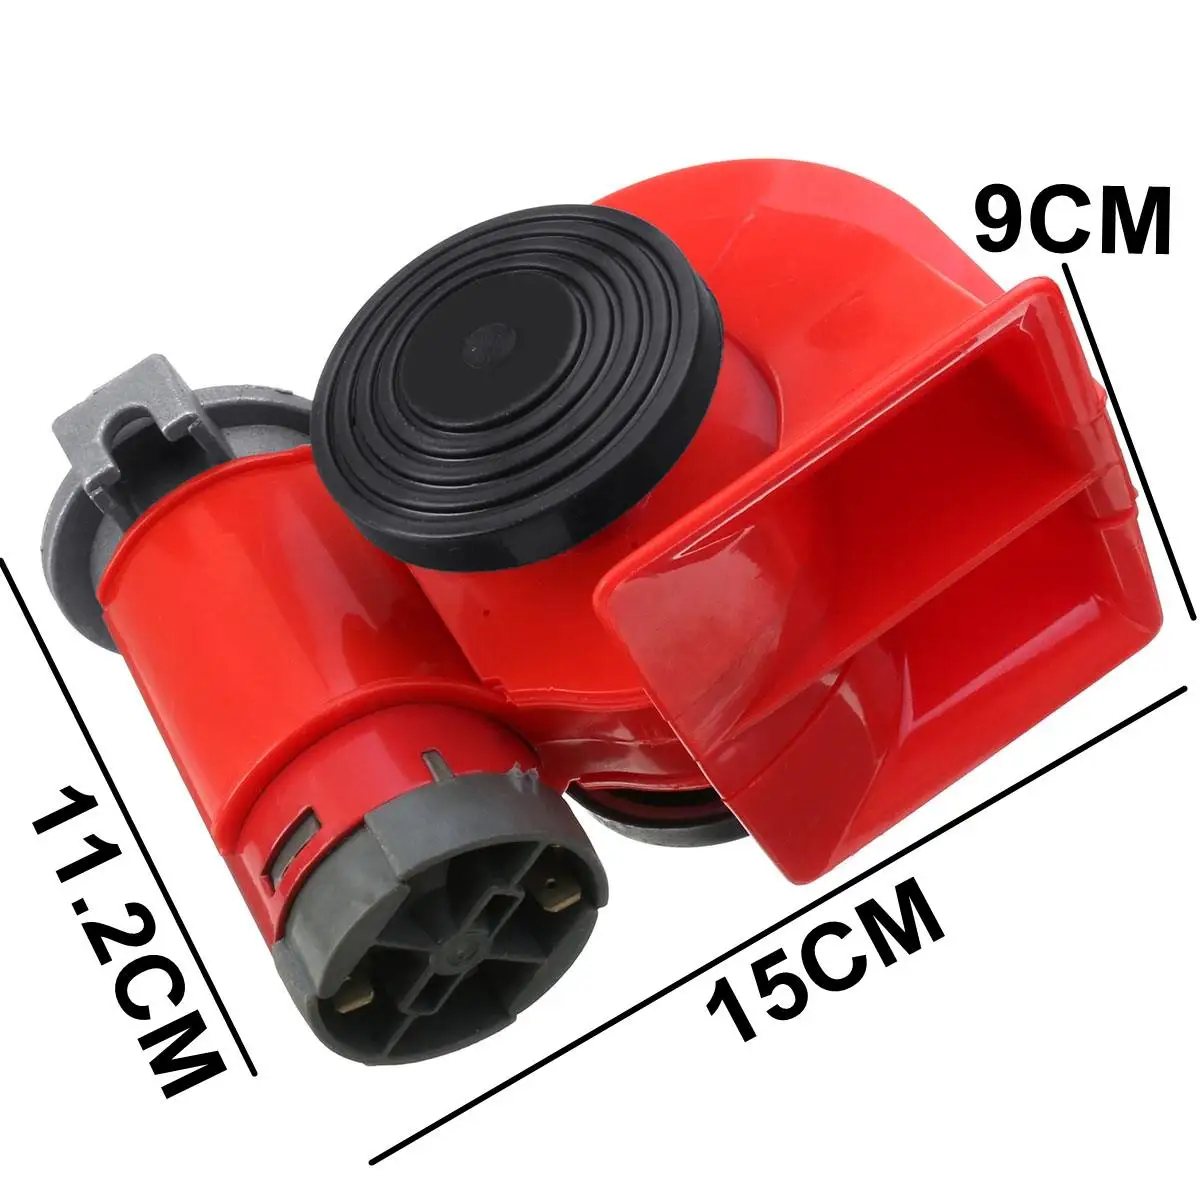 Loud Car Horn Electric Pump Air Loud Horn Snail Compact For Car Truck Motorcycle Bus Van boat vehicle 12V/24V 139dB/300dB images - 6